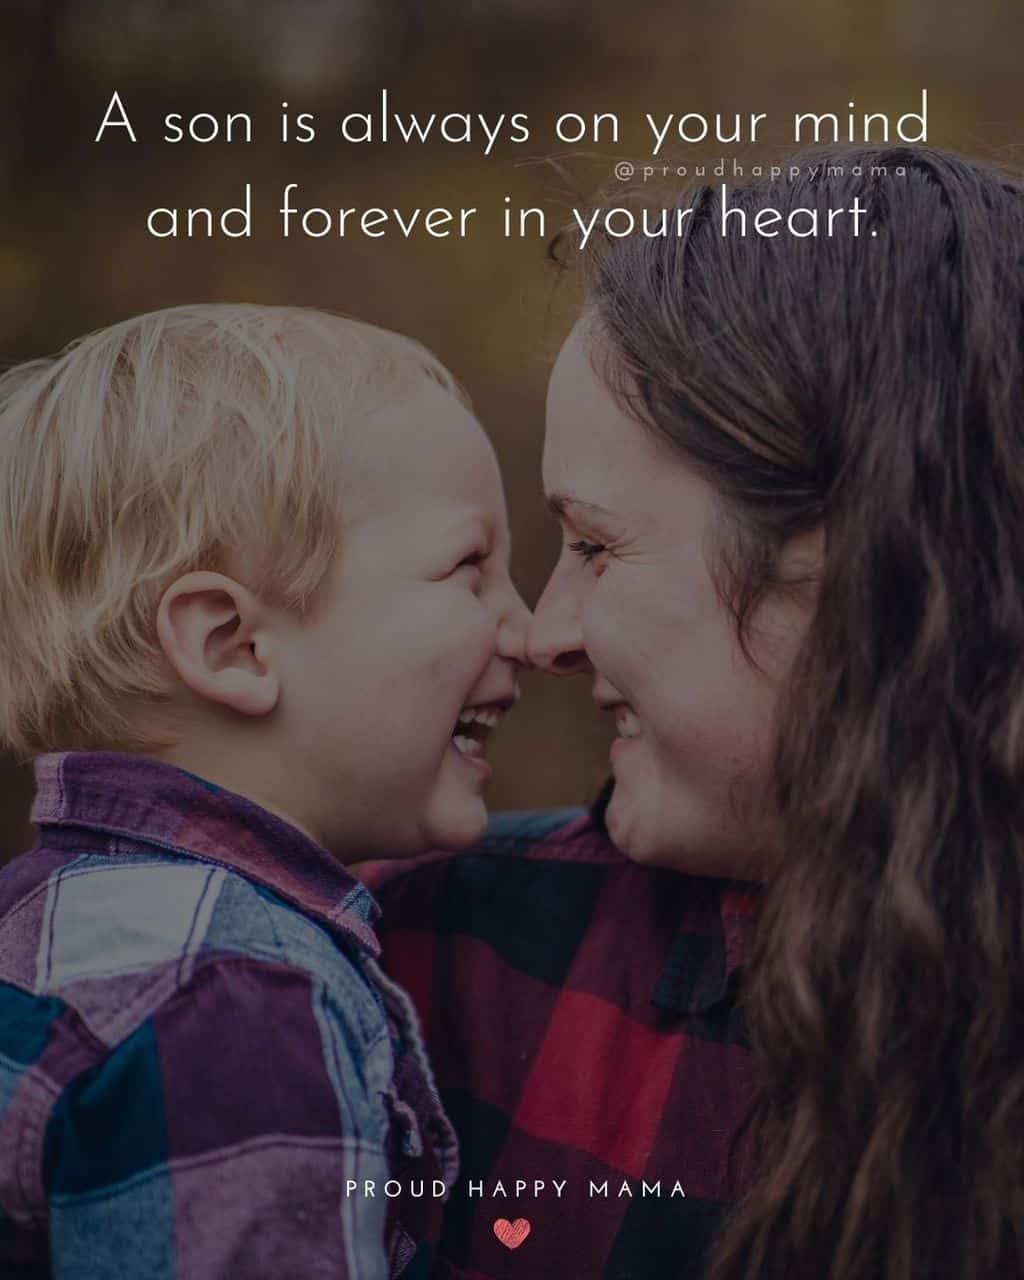 Son Quotes - A son is always on your mind and forever in your heart.’